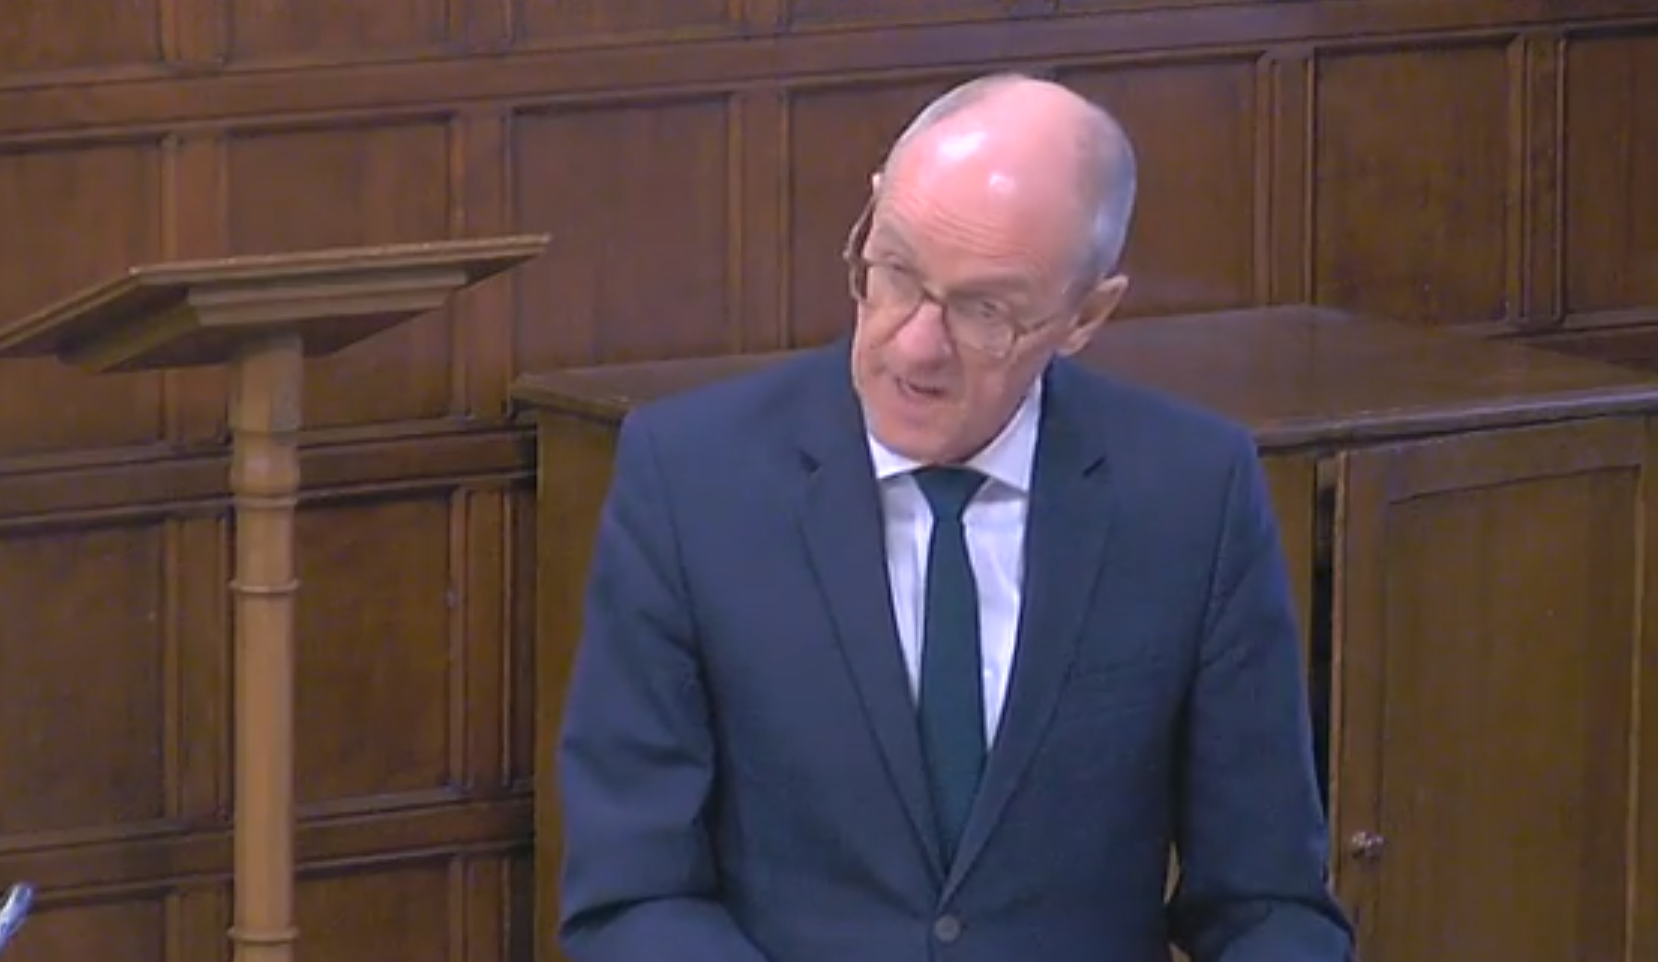 Education minister Nick Gibb speaking in a Westminster Hall debate